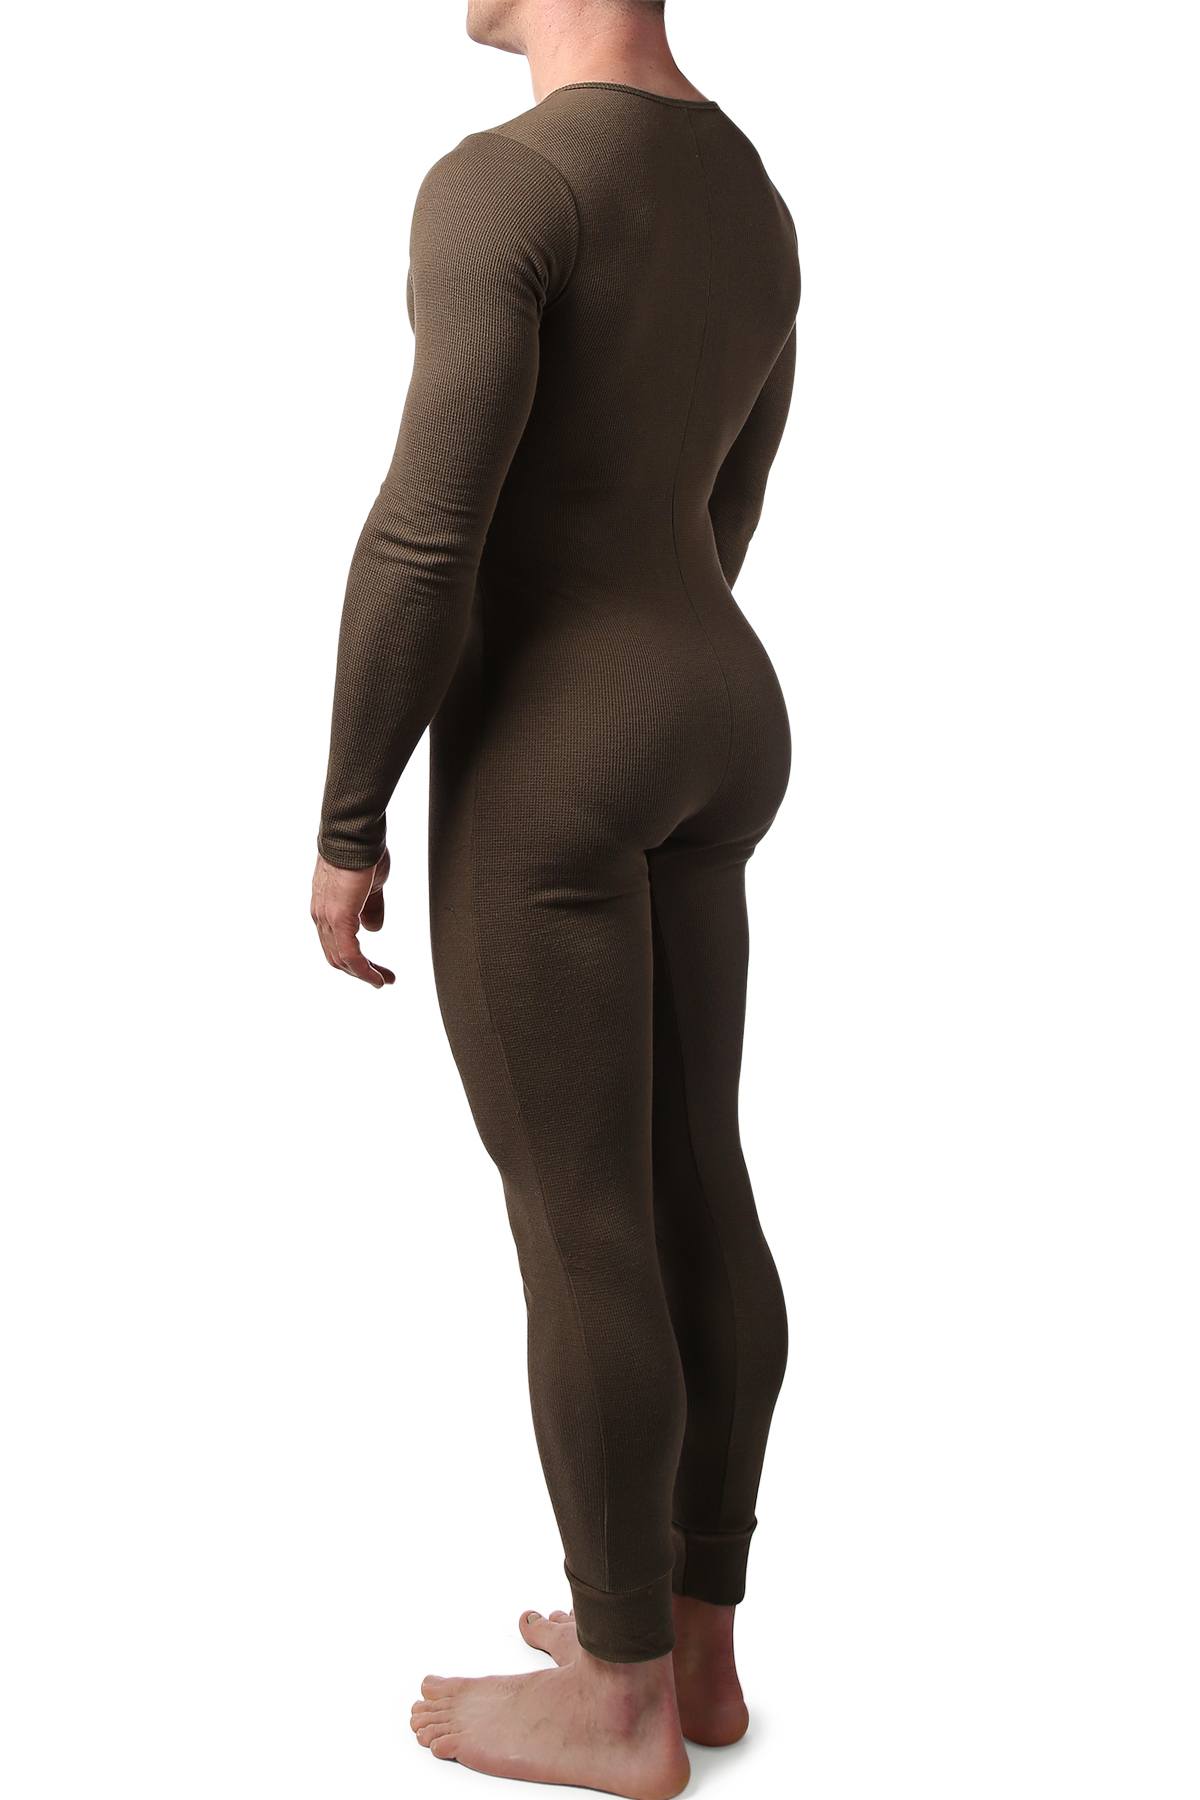 Mens Thermal Underwear All In One Union Suit/Thermal Body Suit